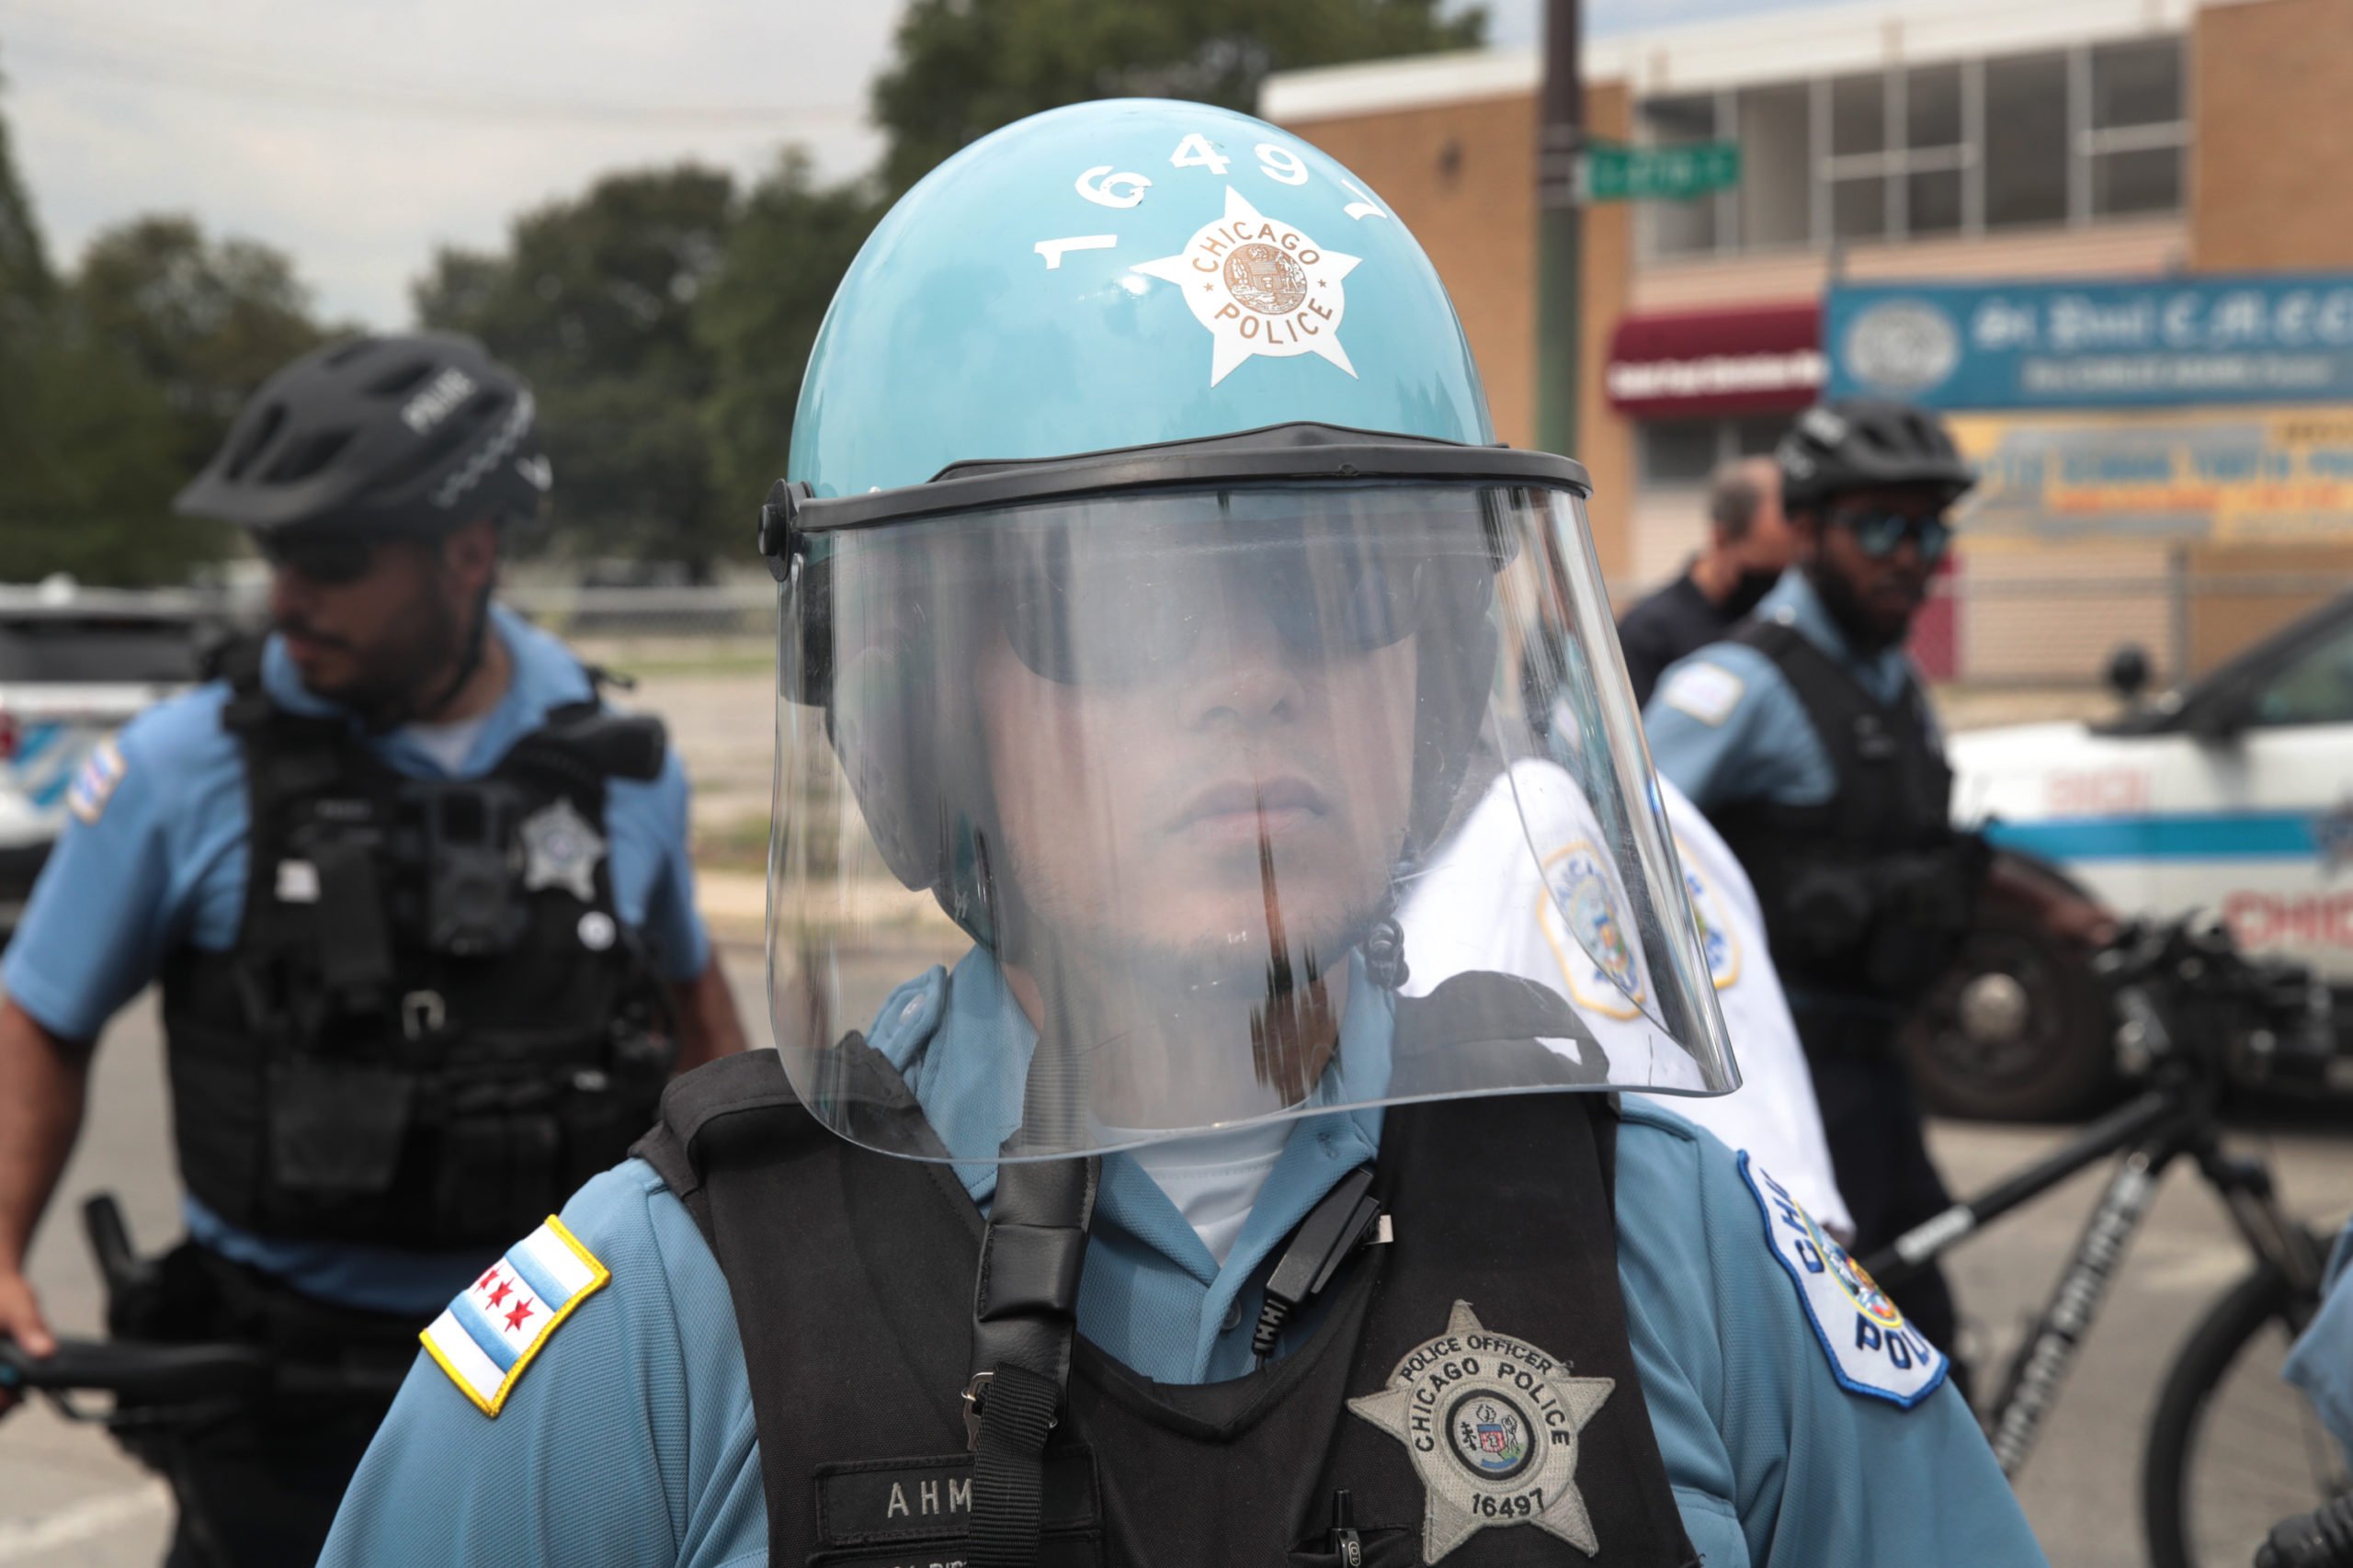 CHICAGO, ILLINOIS - AUGUST 15: Police block a street to prevent demonstrators, protesting police brutality, from marching toward the freeway on August 15, 2020 in Chicago, Illinois. The demonstration was one of several in the city today, either in support of or in opposition to police. (Scott Olson/Getty Images)